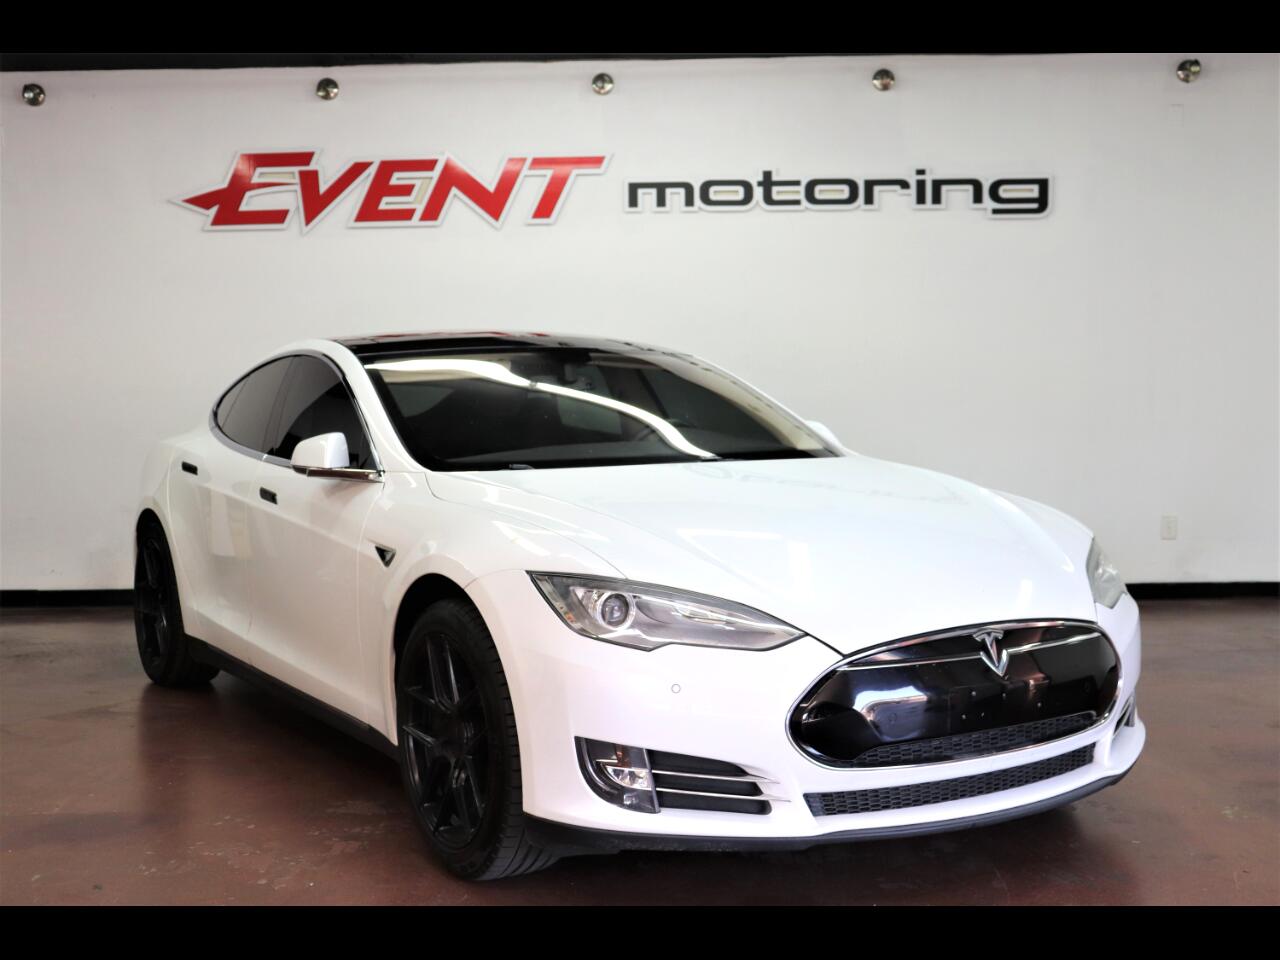 Tesla Model S 4dr Sdn 60 kWh Battery 2014